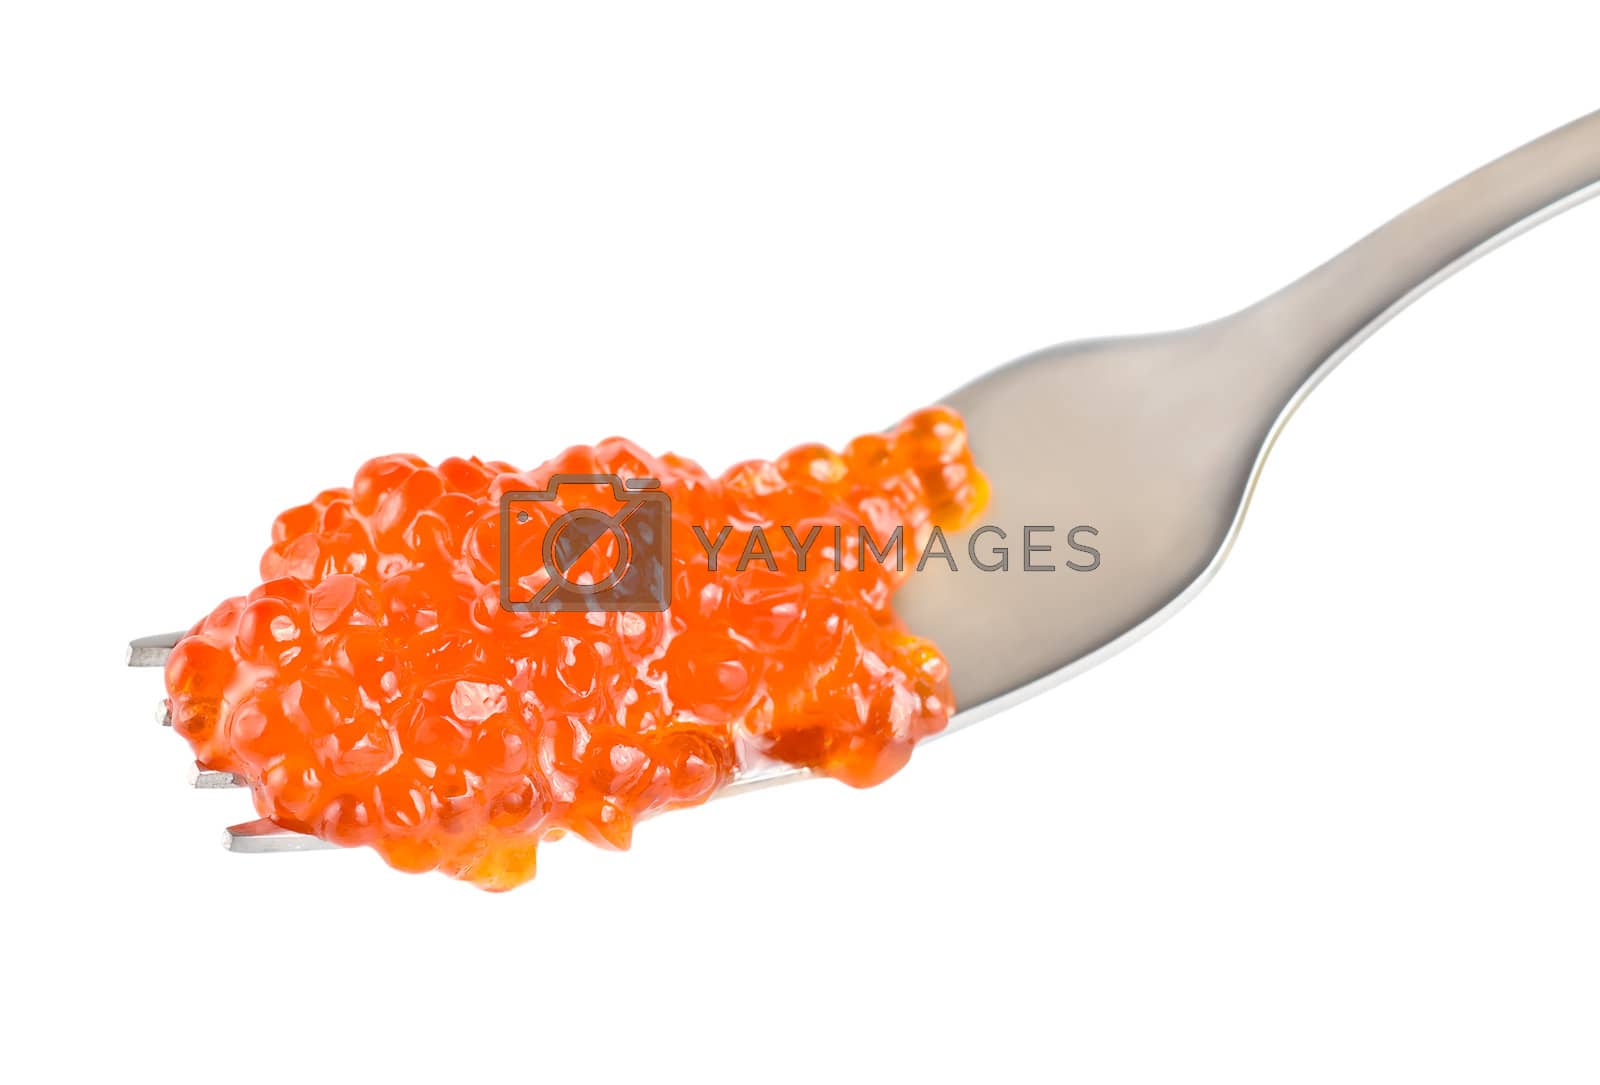 Royalty free image of Red caviar on a fork by Givaga